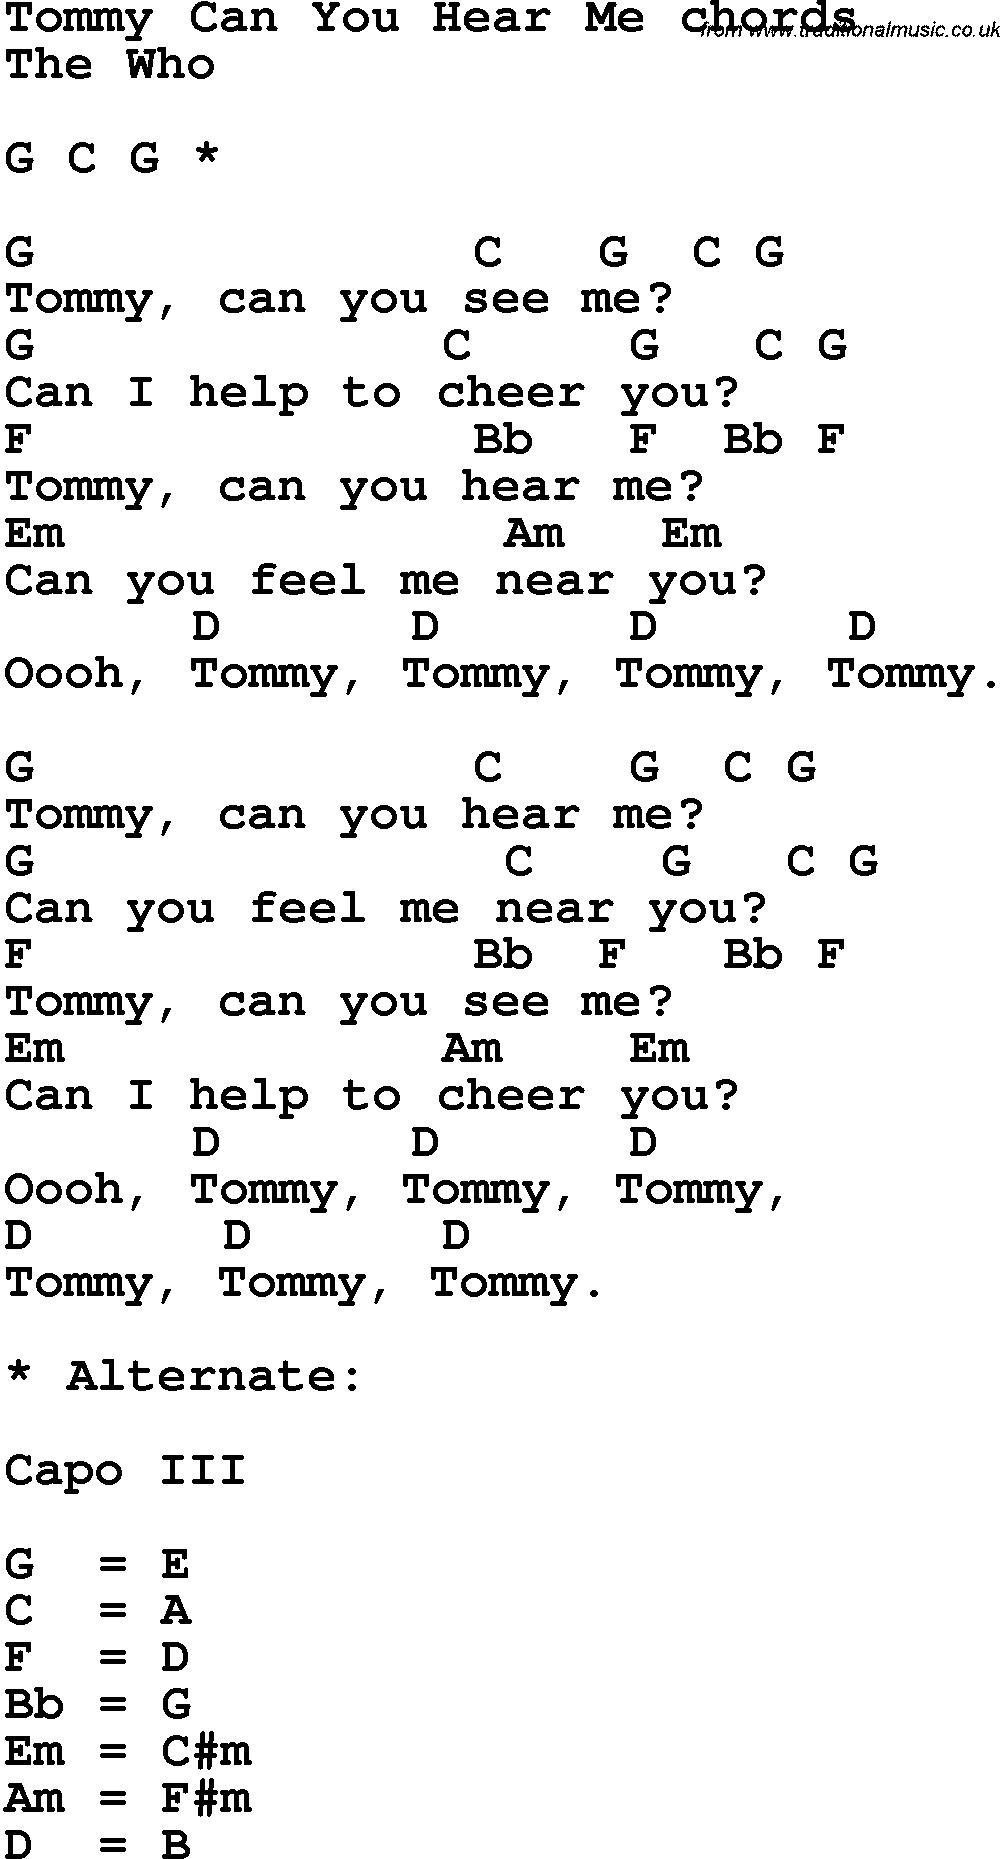 Song Lyrics with guitar chords for Tommy Can You Hear Me